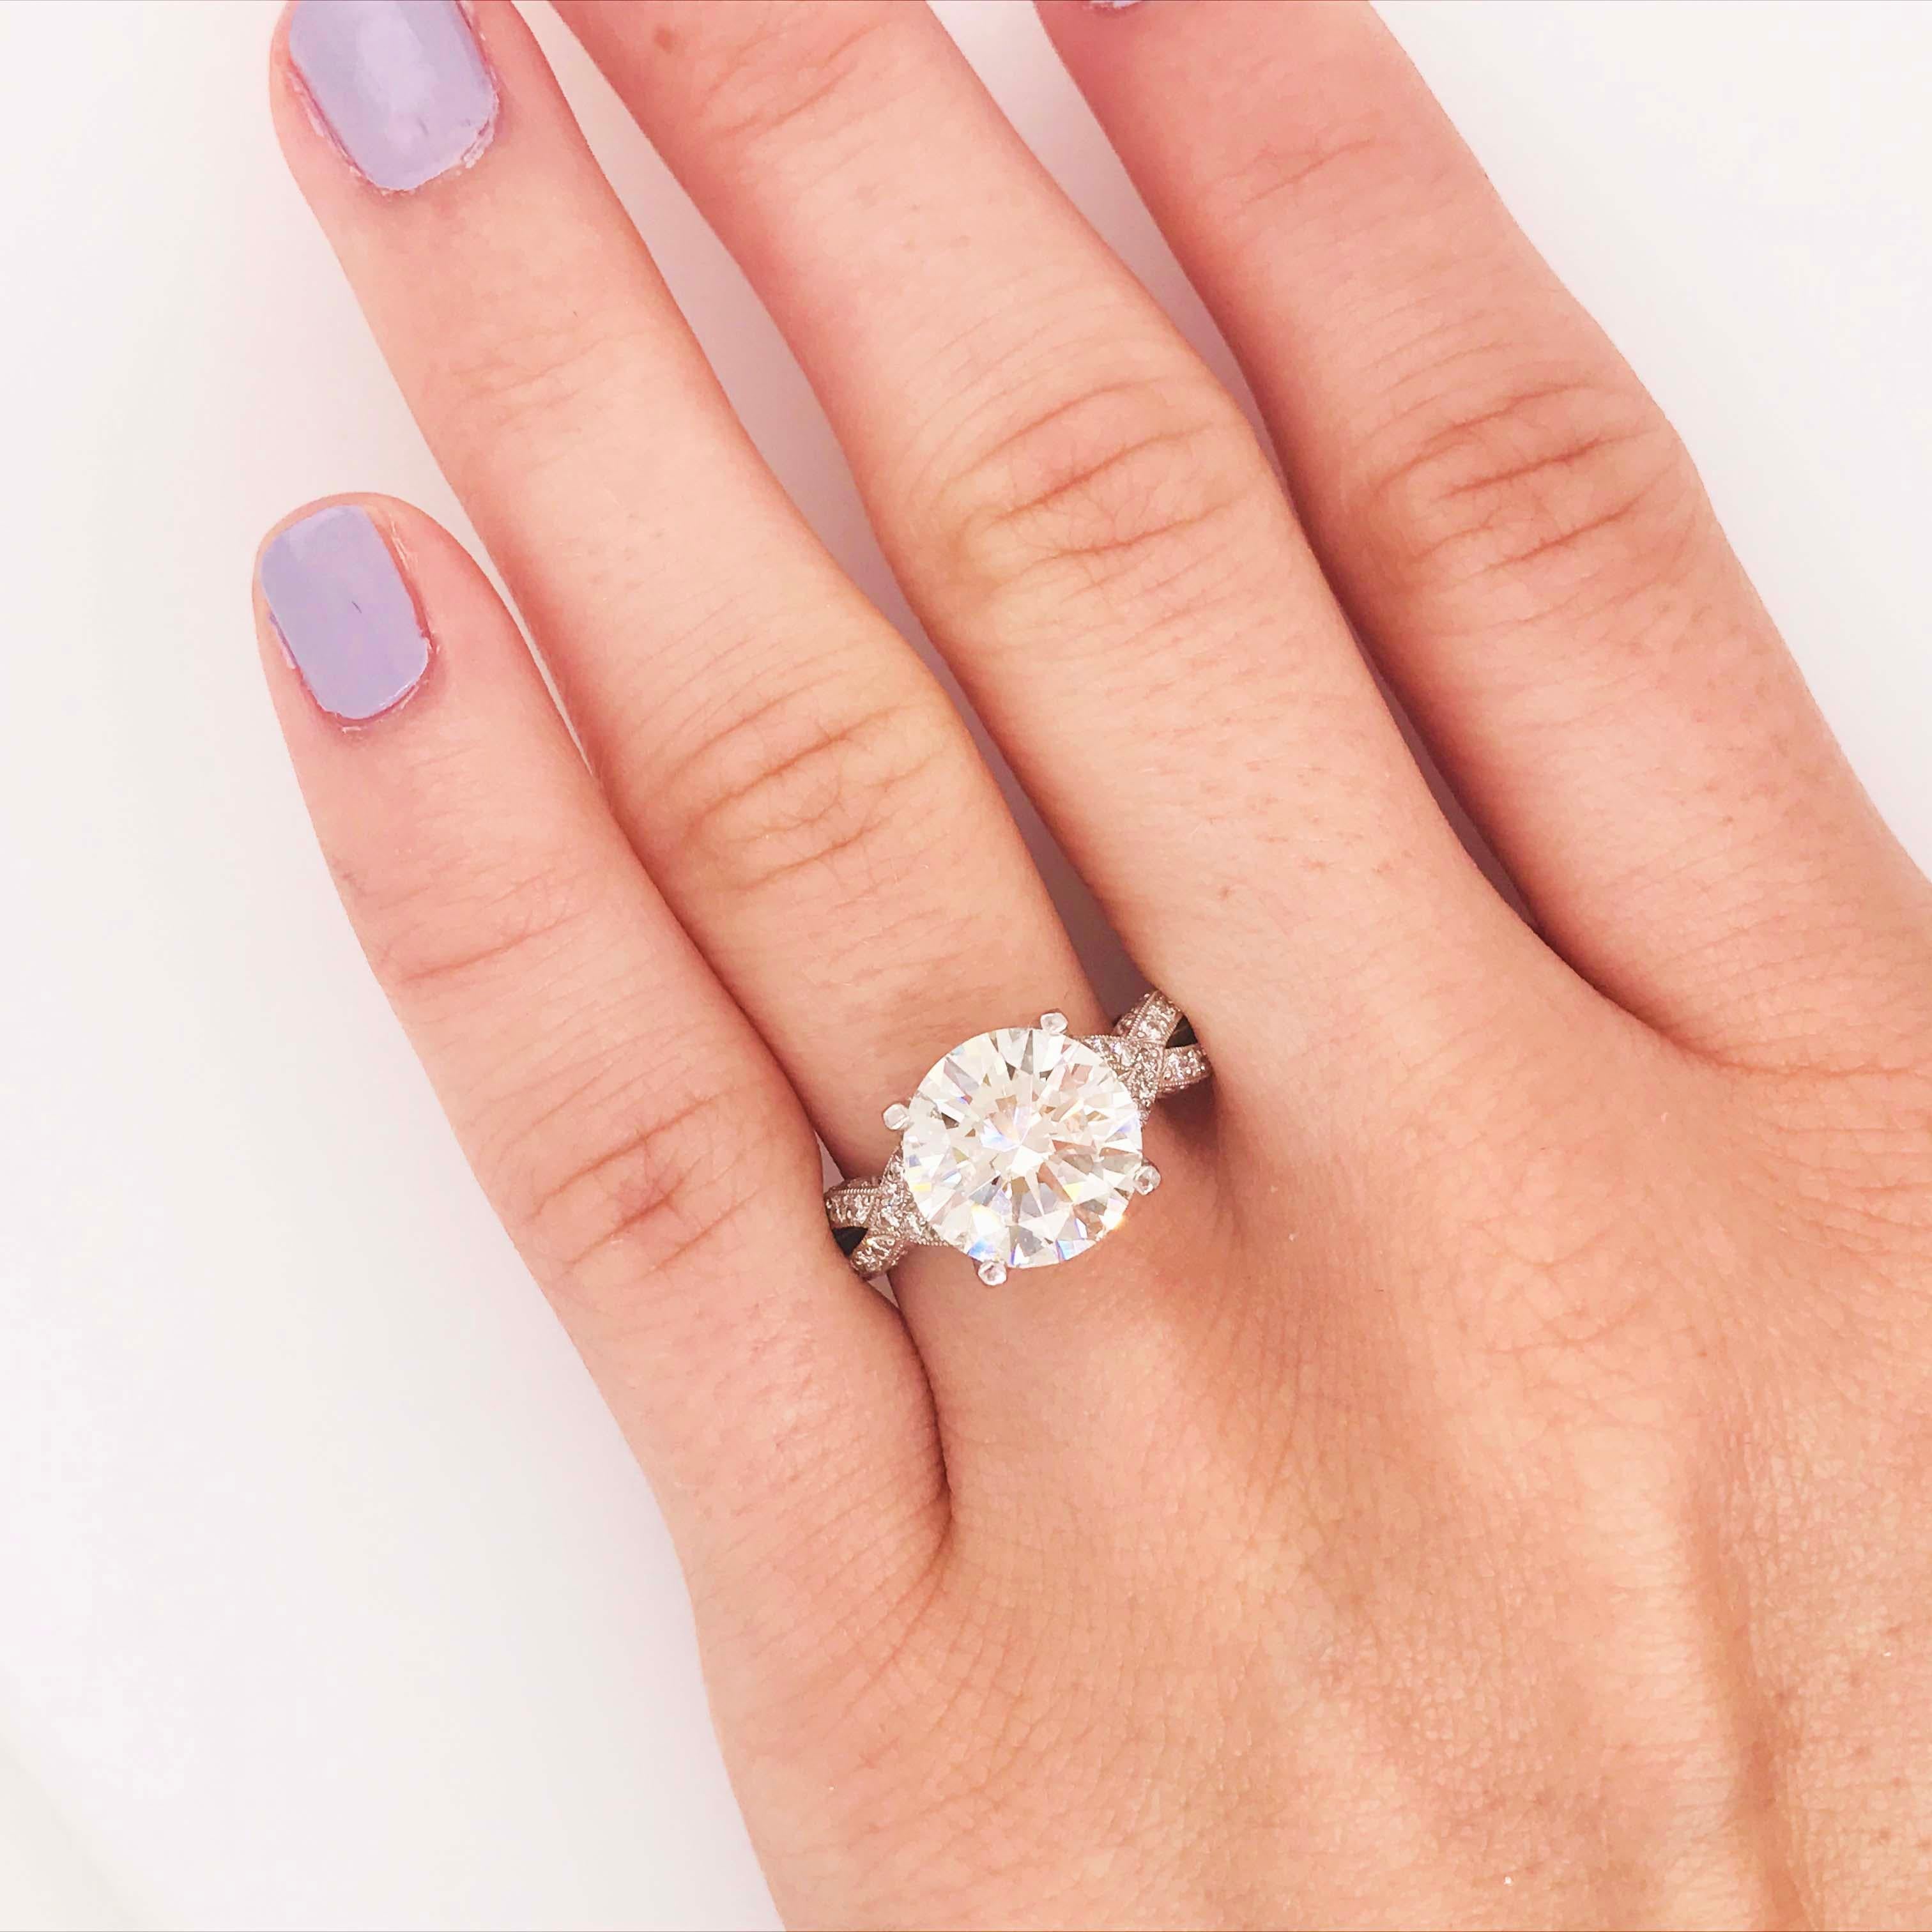 This Tacori Royal T platinum and diamond ring is iconic!  It has a gorgeous round brilliant cut natural diamond that weighs 4.00 carats.  The Tacori Royal T has an infinity design on either side of the center diamond that is pave set with diamonds